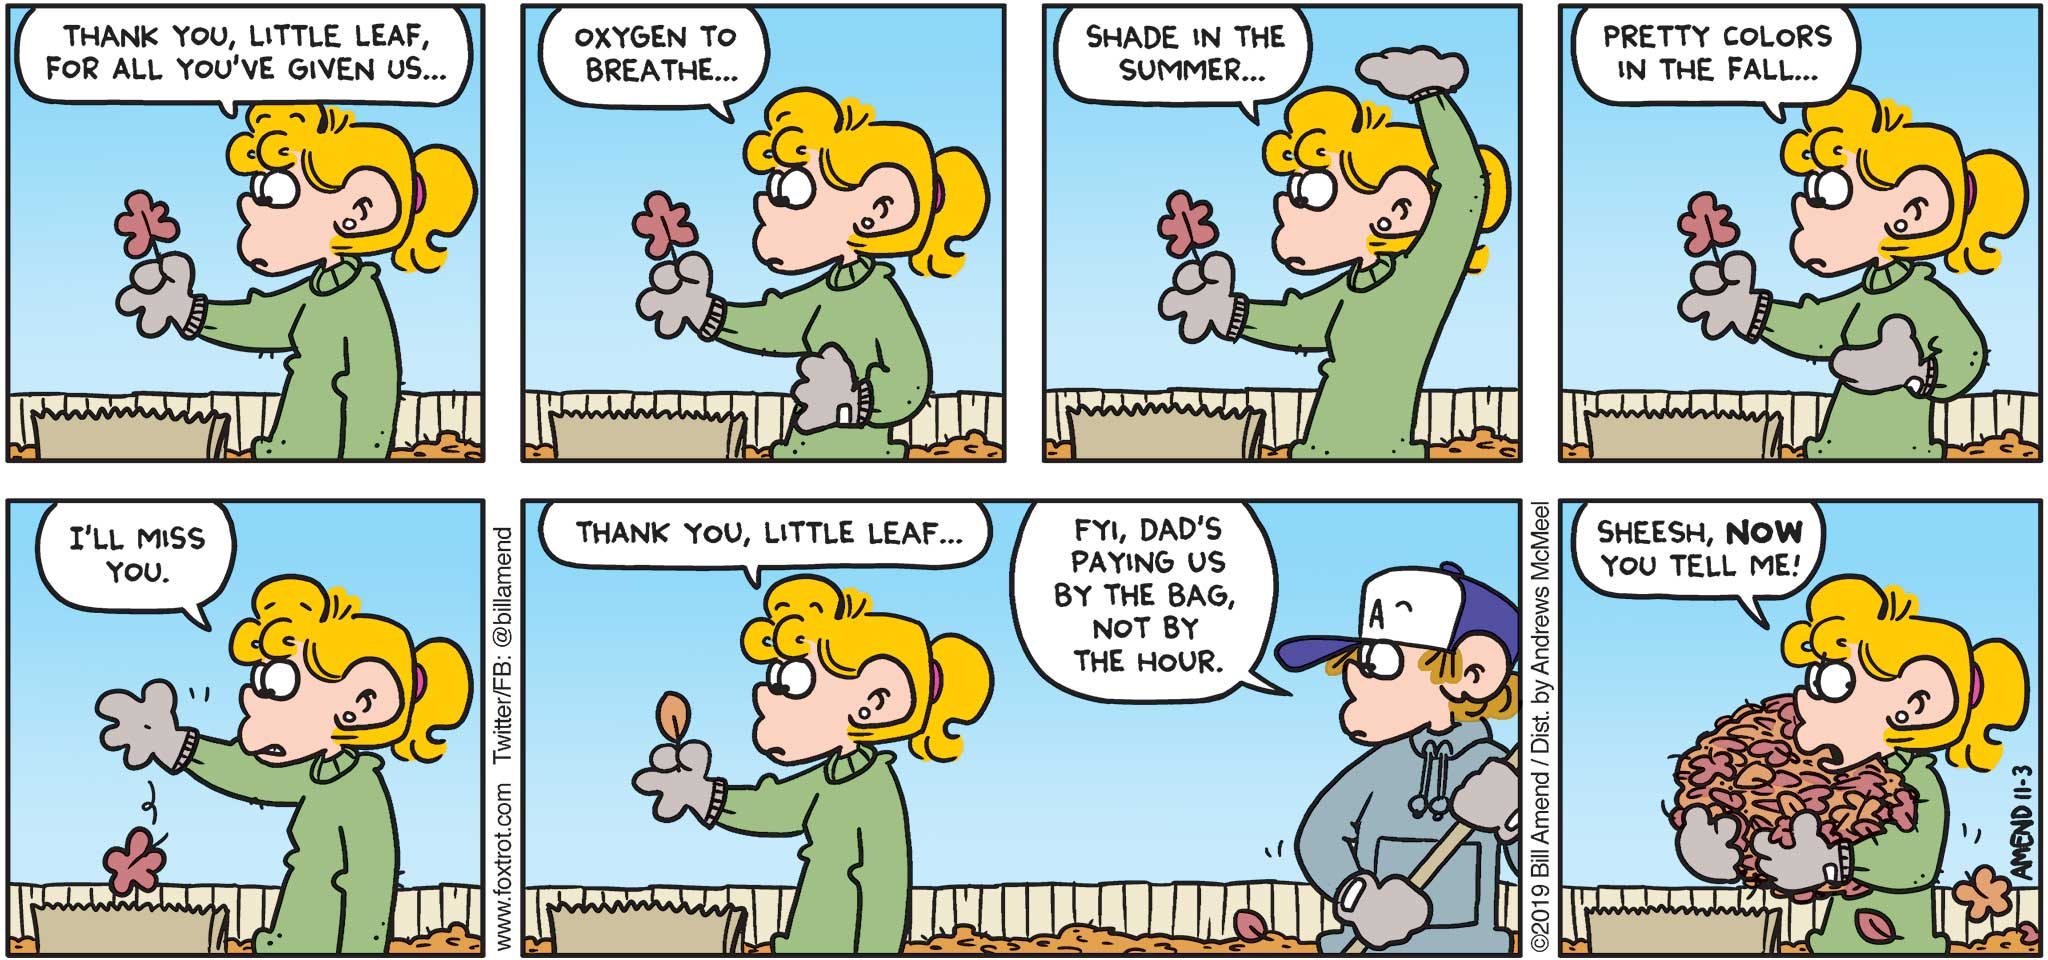 FoxTrot by Bill Amend - "Yardly Working" published November 3, 2019 - Paige: Thank you, little leaf, for all you've given us... Oxygen to breathe... Shade in the summer... Pretty colors in the fall... I'll miss you. Thank you, little leaf. Peter: FYI, dad's paying us by the bag, not by the hour. Paige: Sheesh, now you tell me!